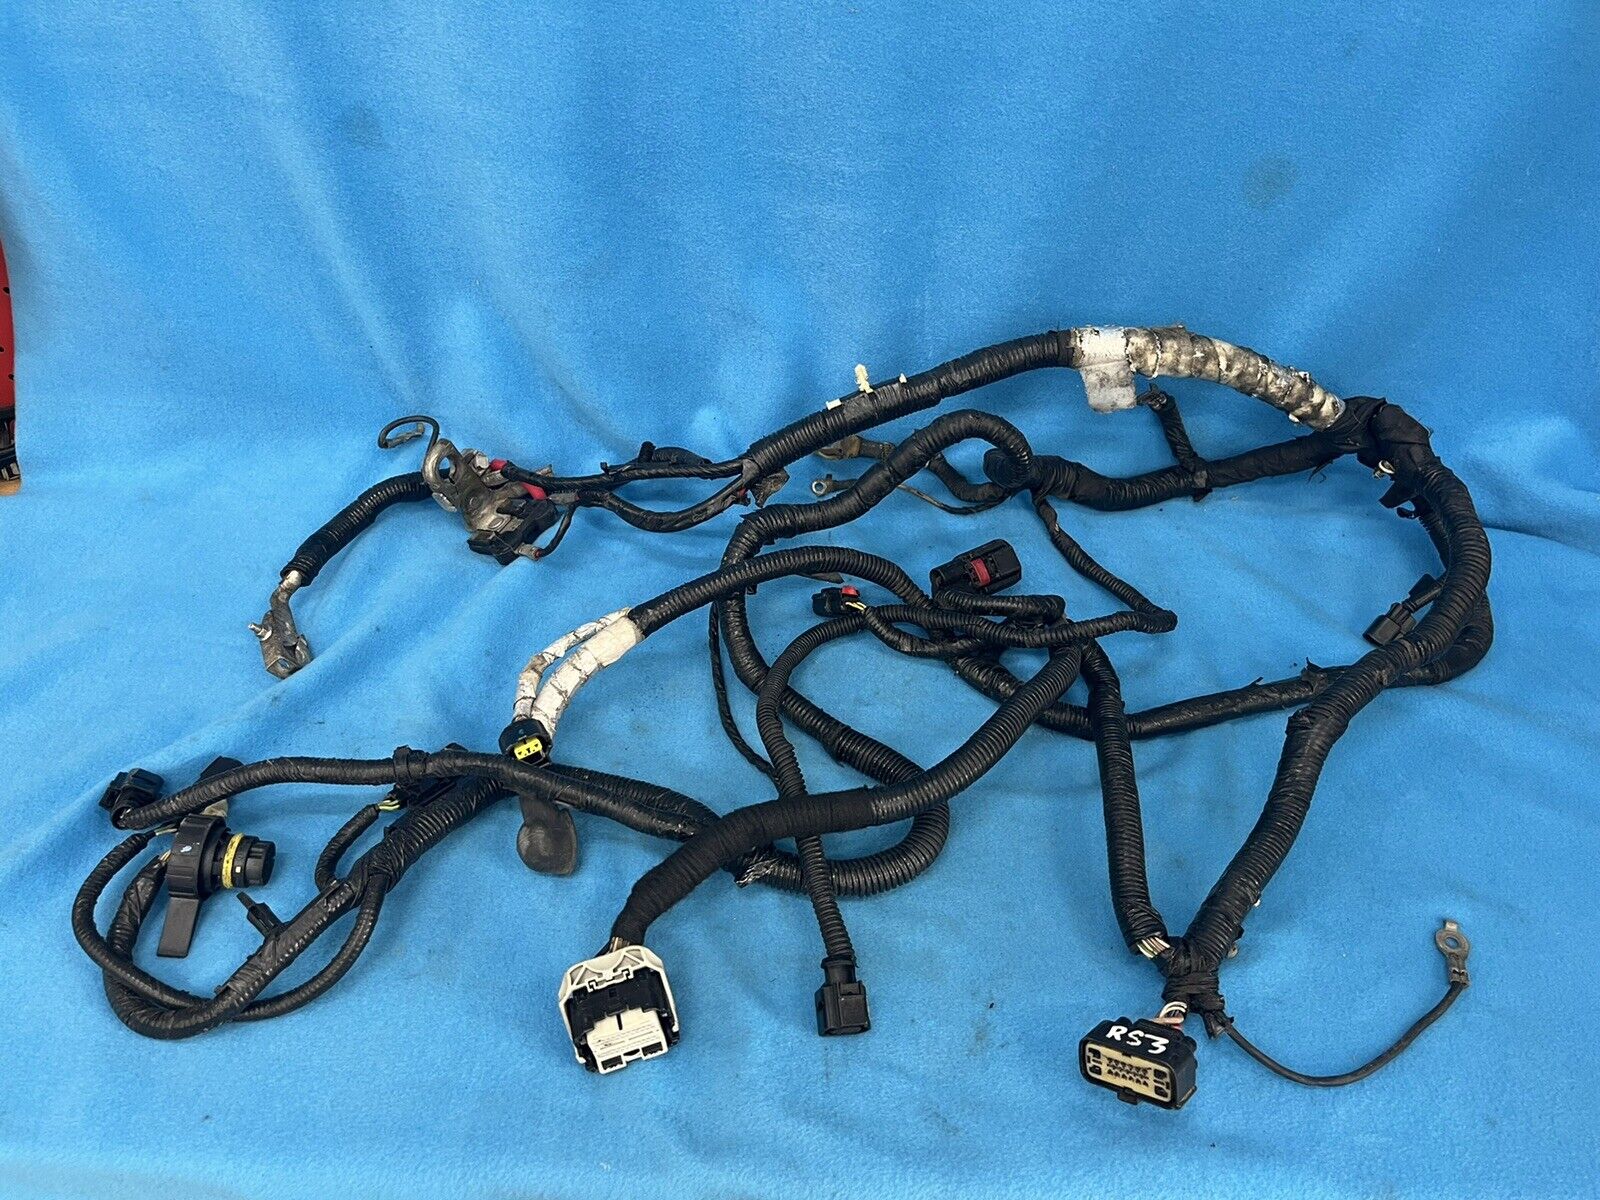 2014 Mustang GT Regular store Transmission Harness OEM Battery Cables shopping 6R80